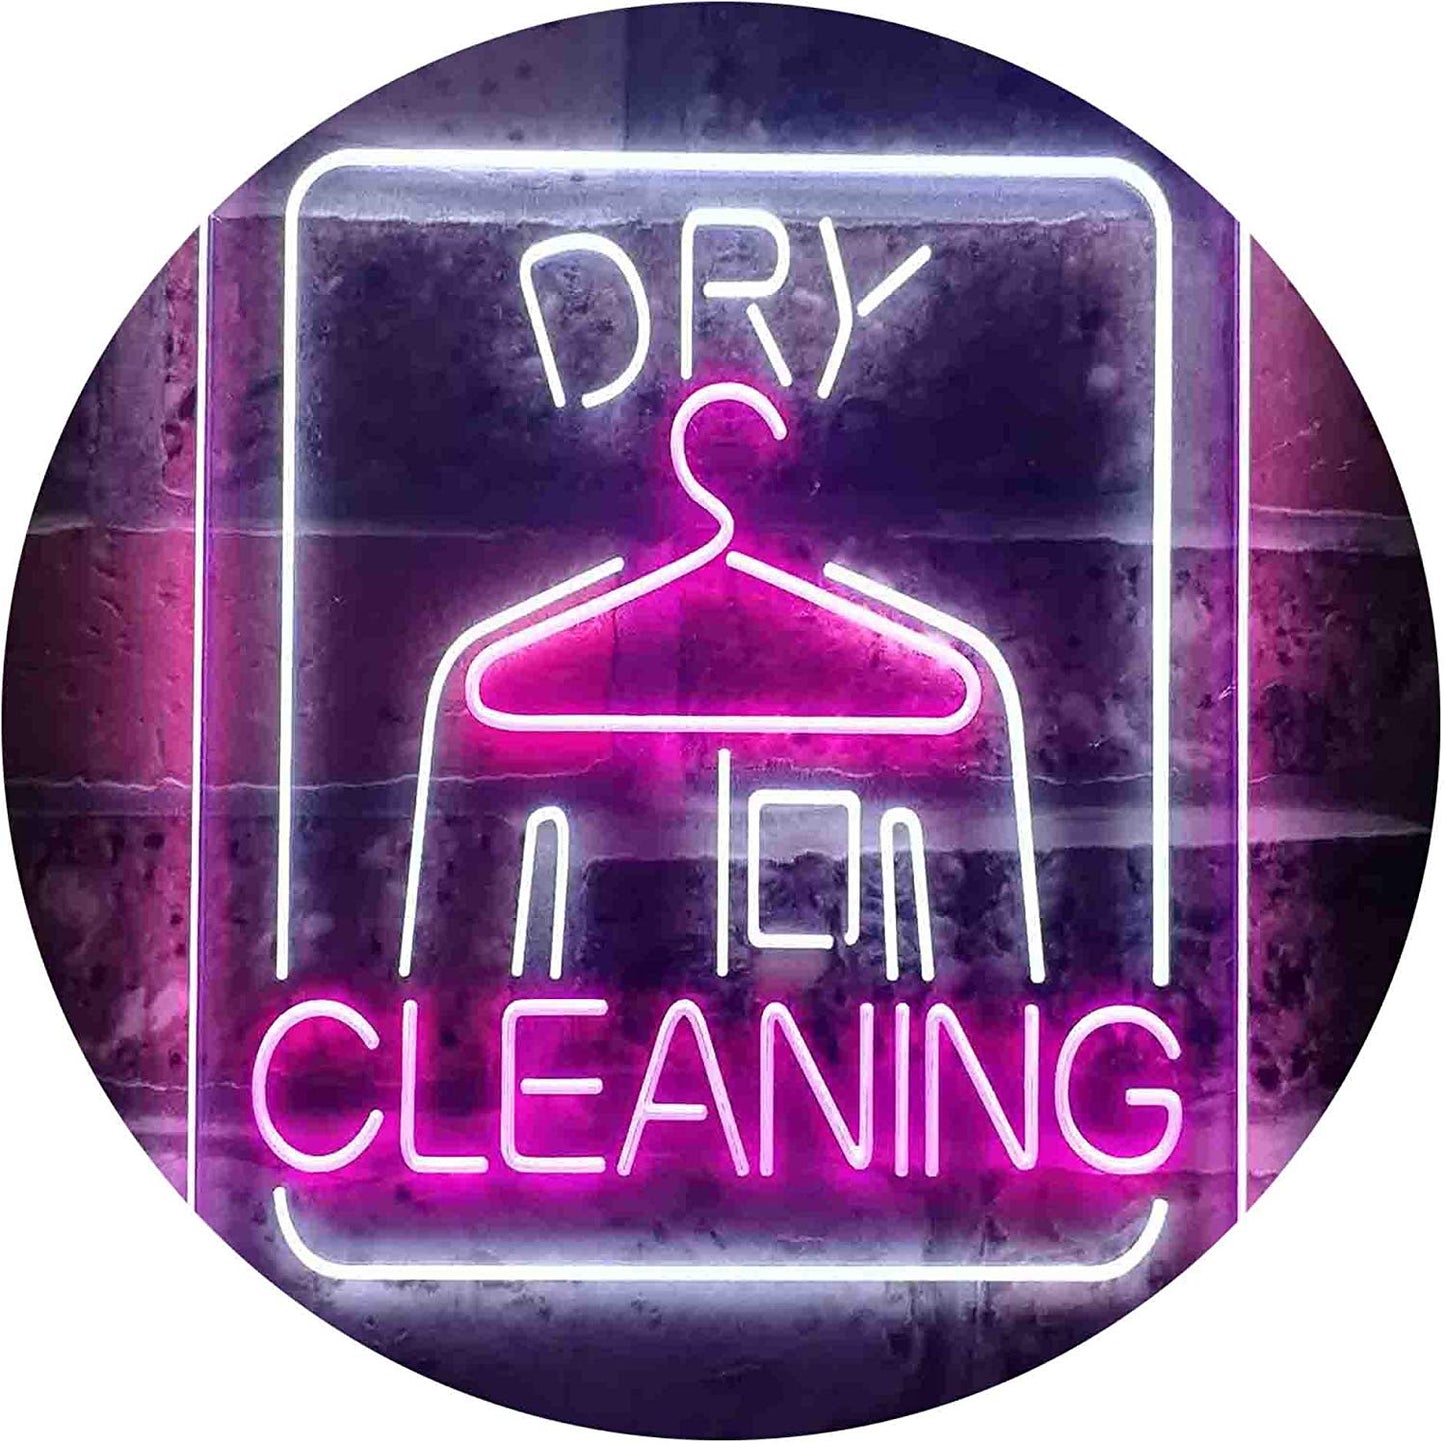 Cleaners Dry Cleaning LED Neon Light Sign - Way Up Gifts